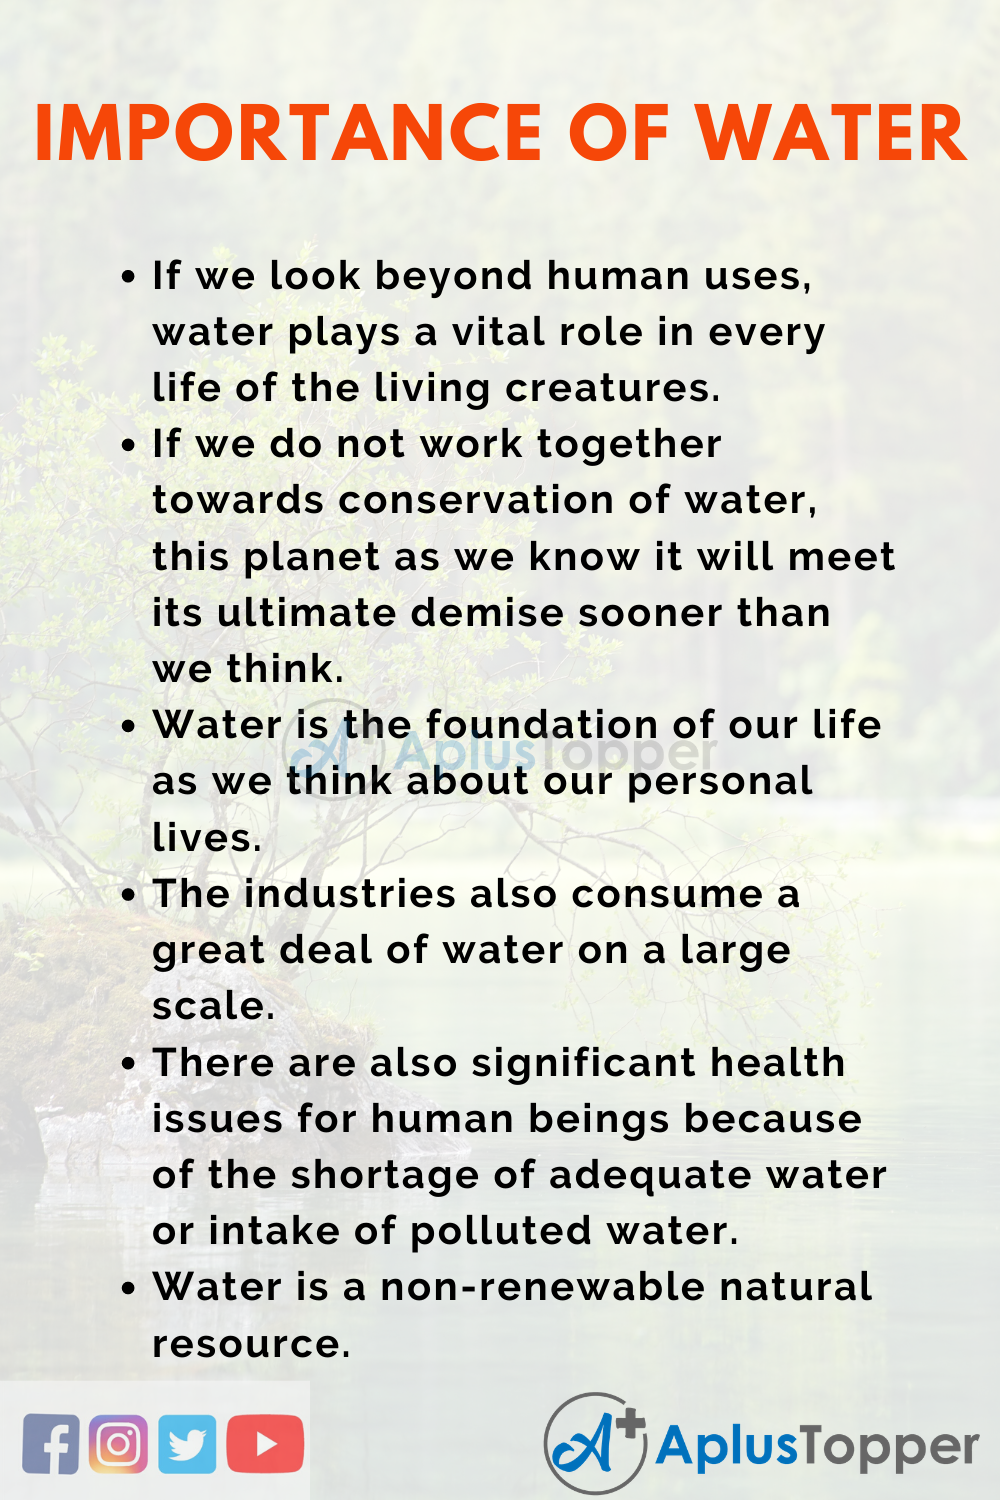 essay about water for industrial usage